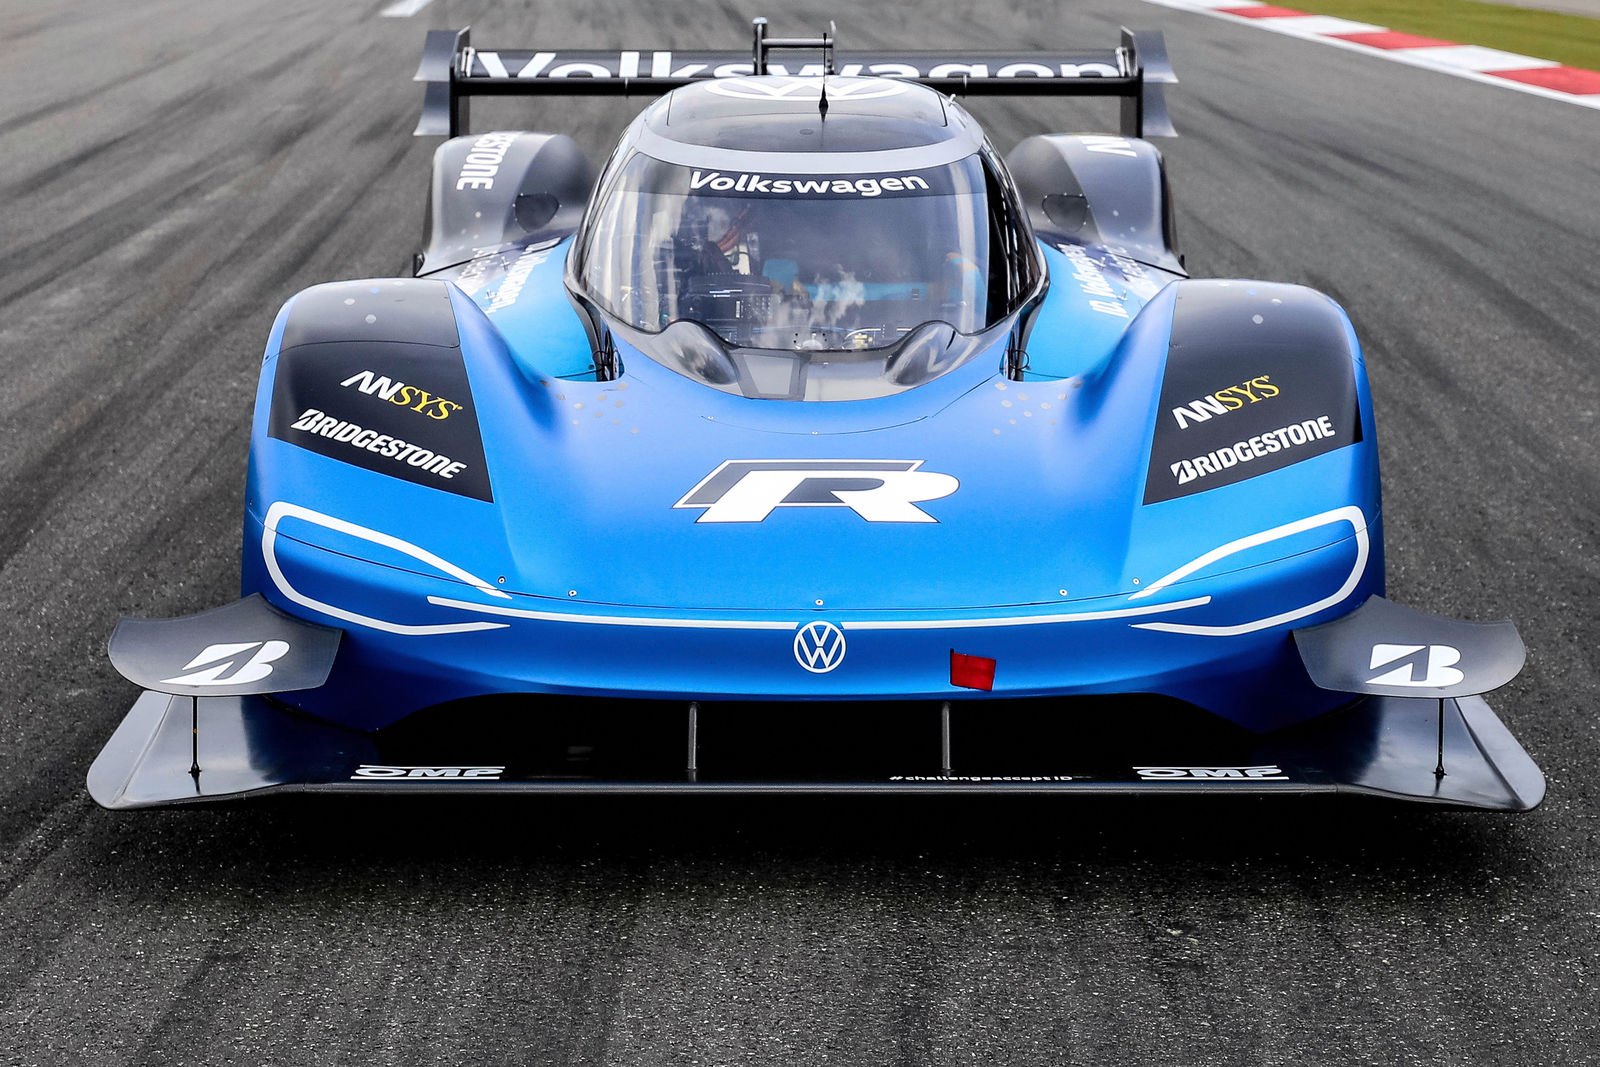 Goodwood Festival of Speed: Volkswagen ID.R electric race car sets sights on Formula 1 record